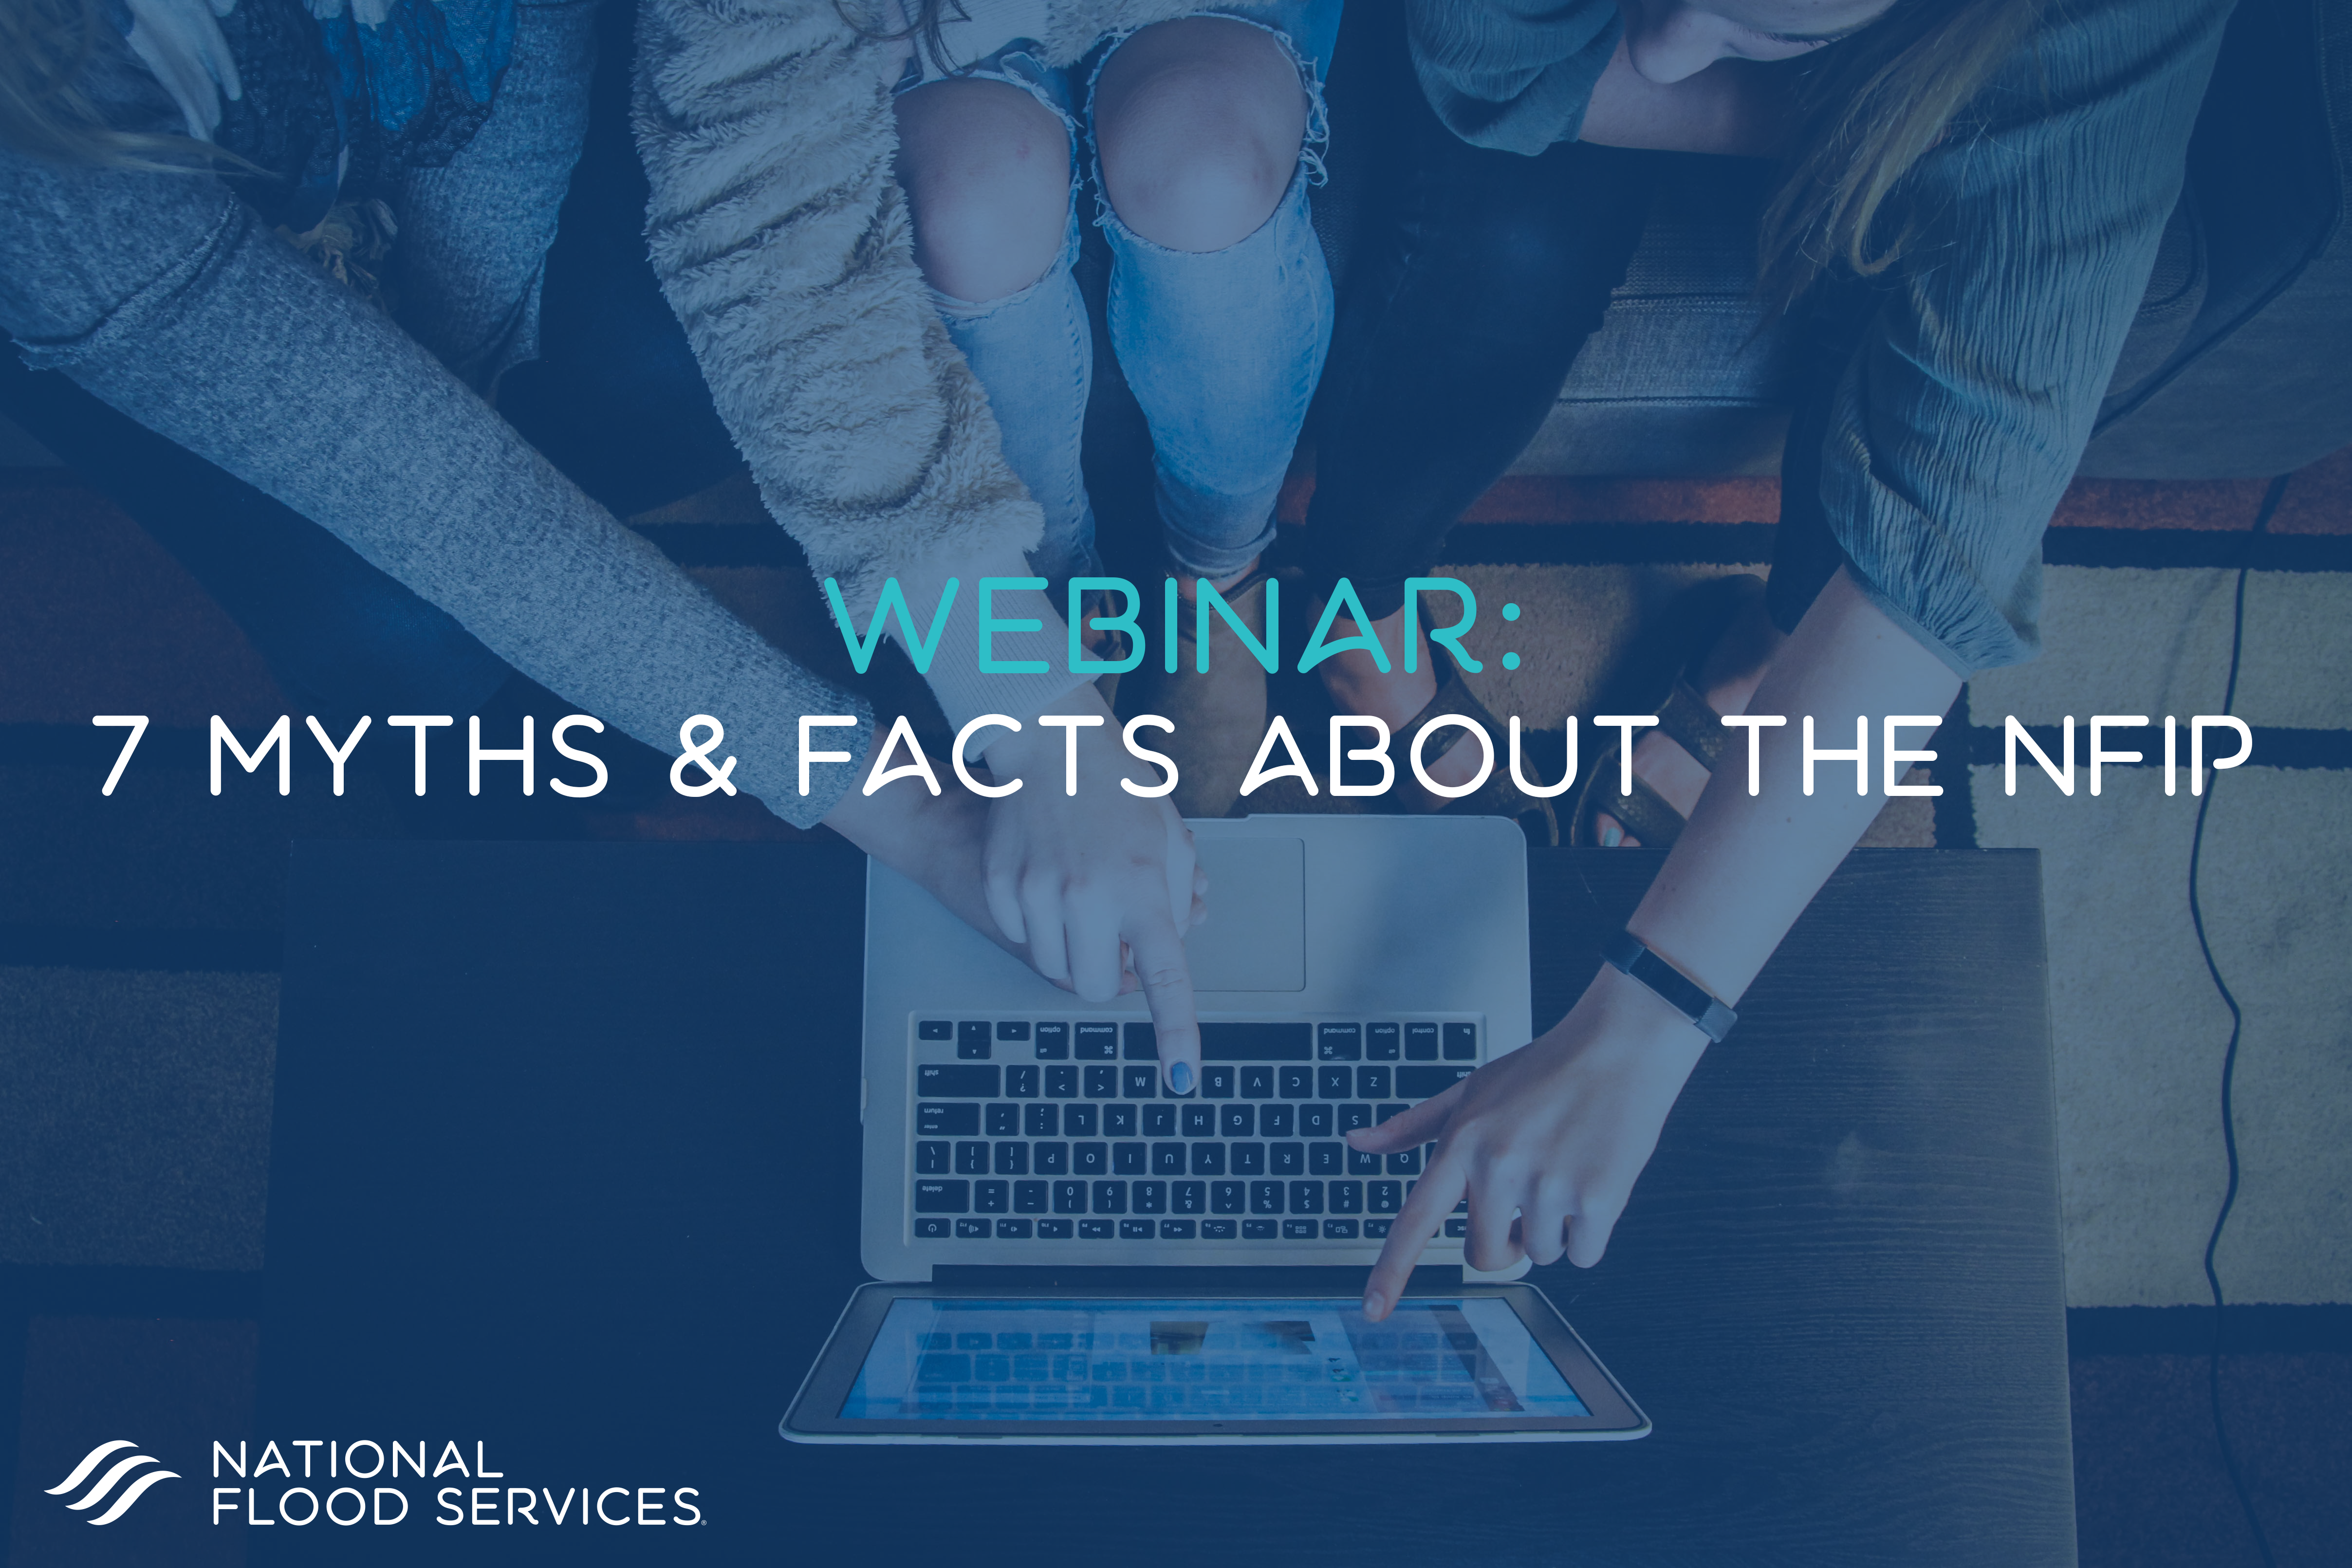 7 myths and facts about the NFIP webinar